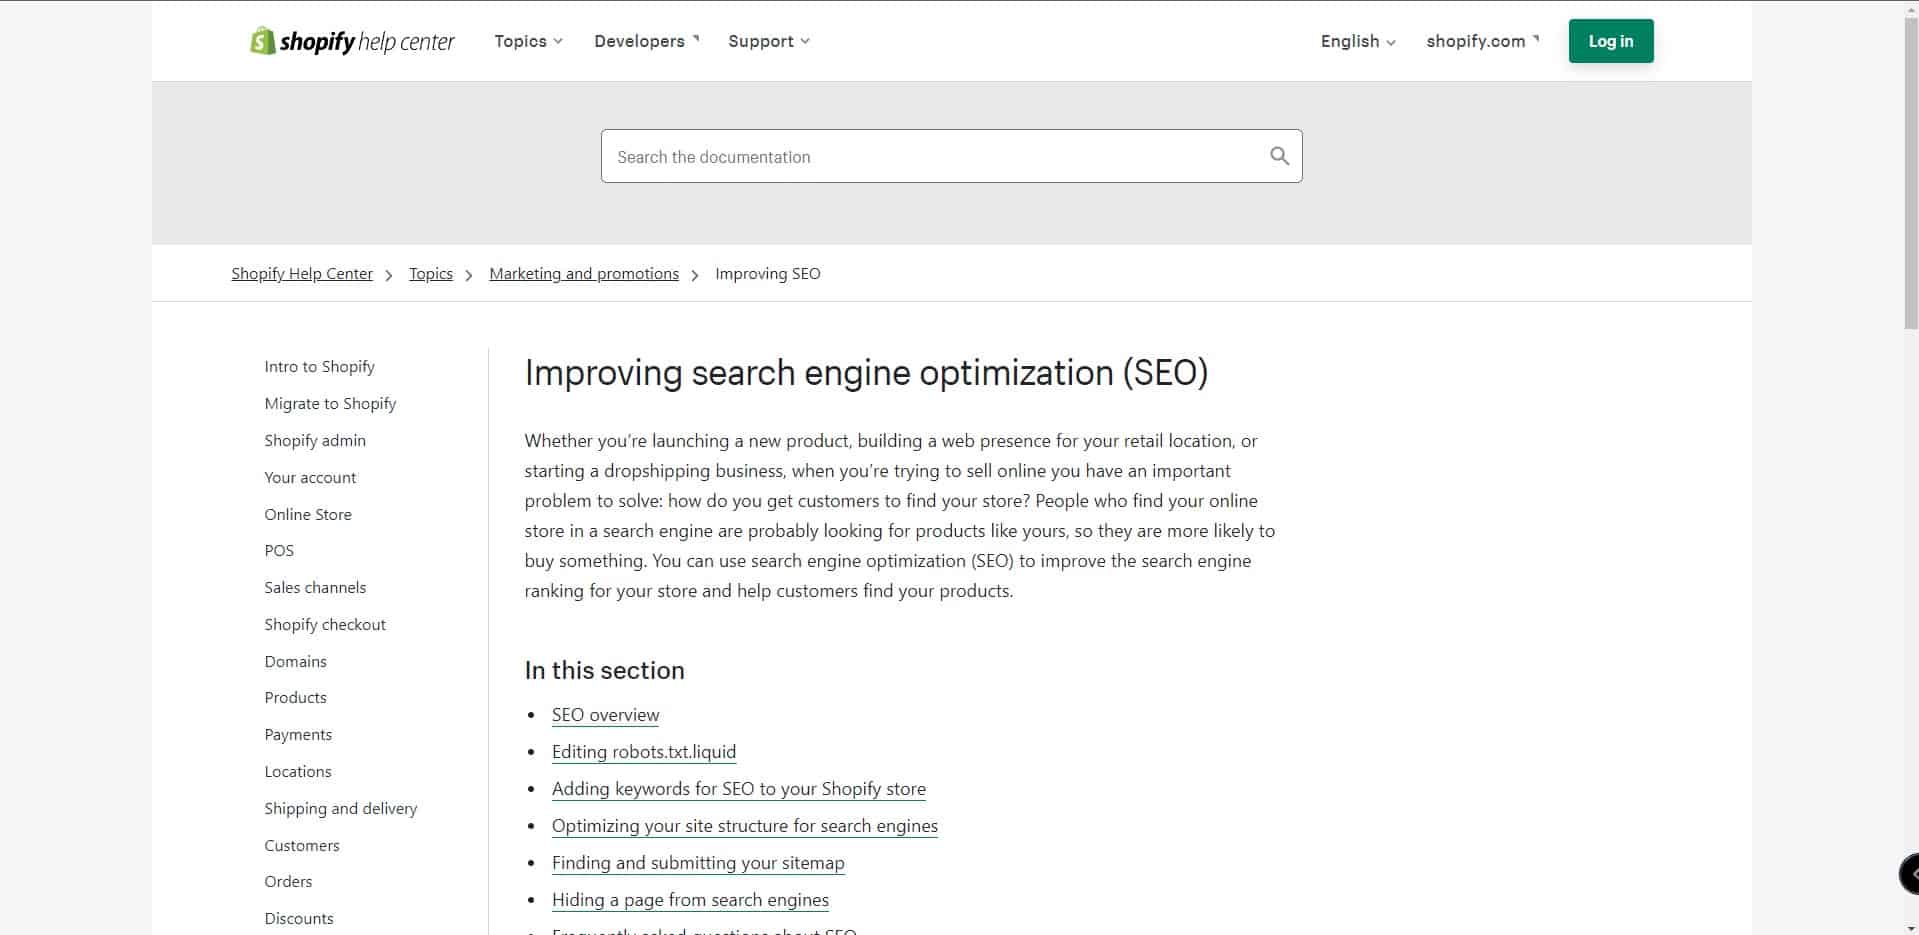 Shopify help center page with details about search engine optimization